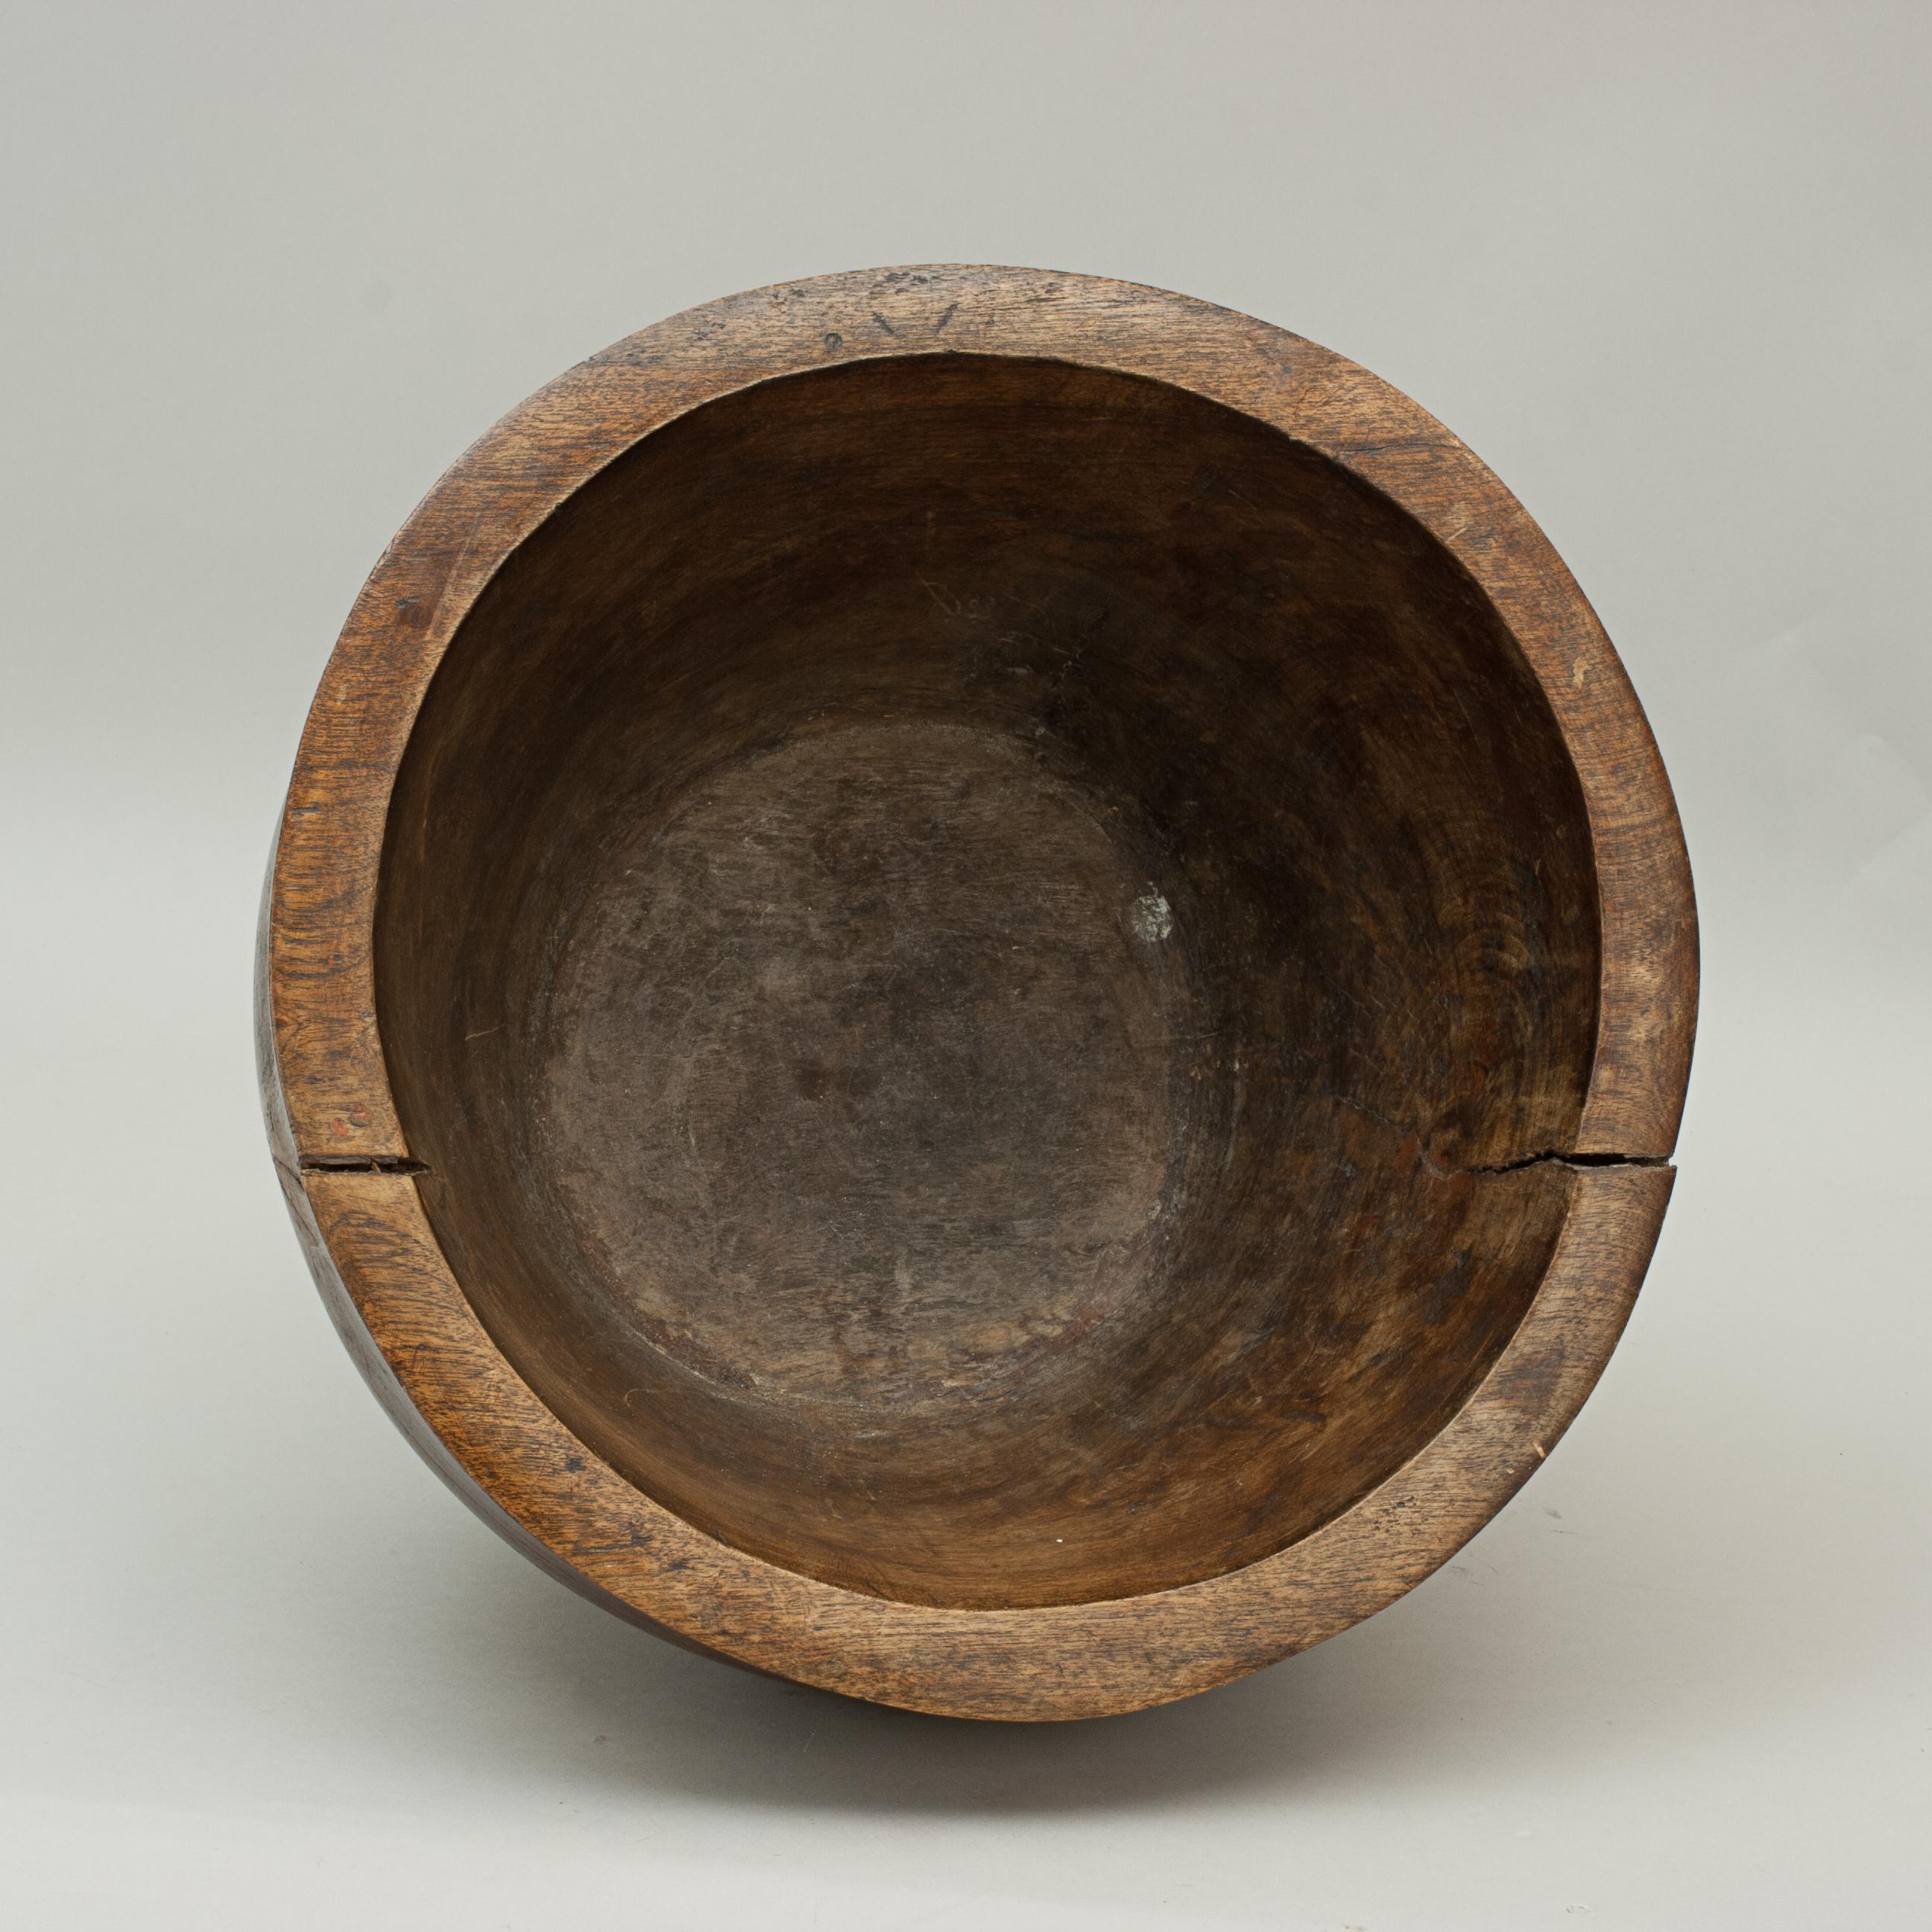 Early 20th Century Vintage, Large Wooden Bowl in Walnut or Teak